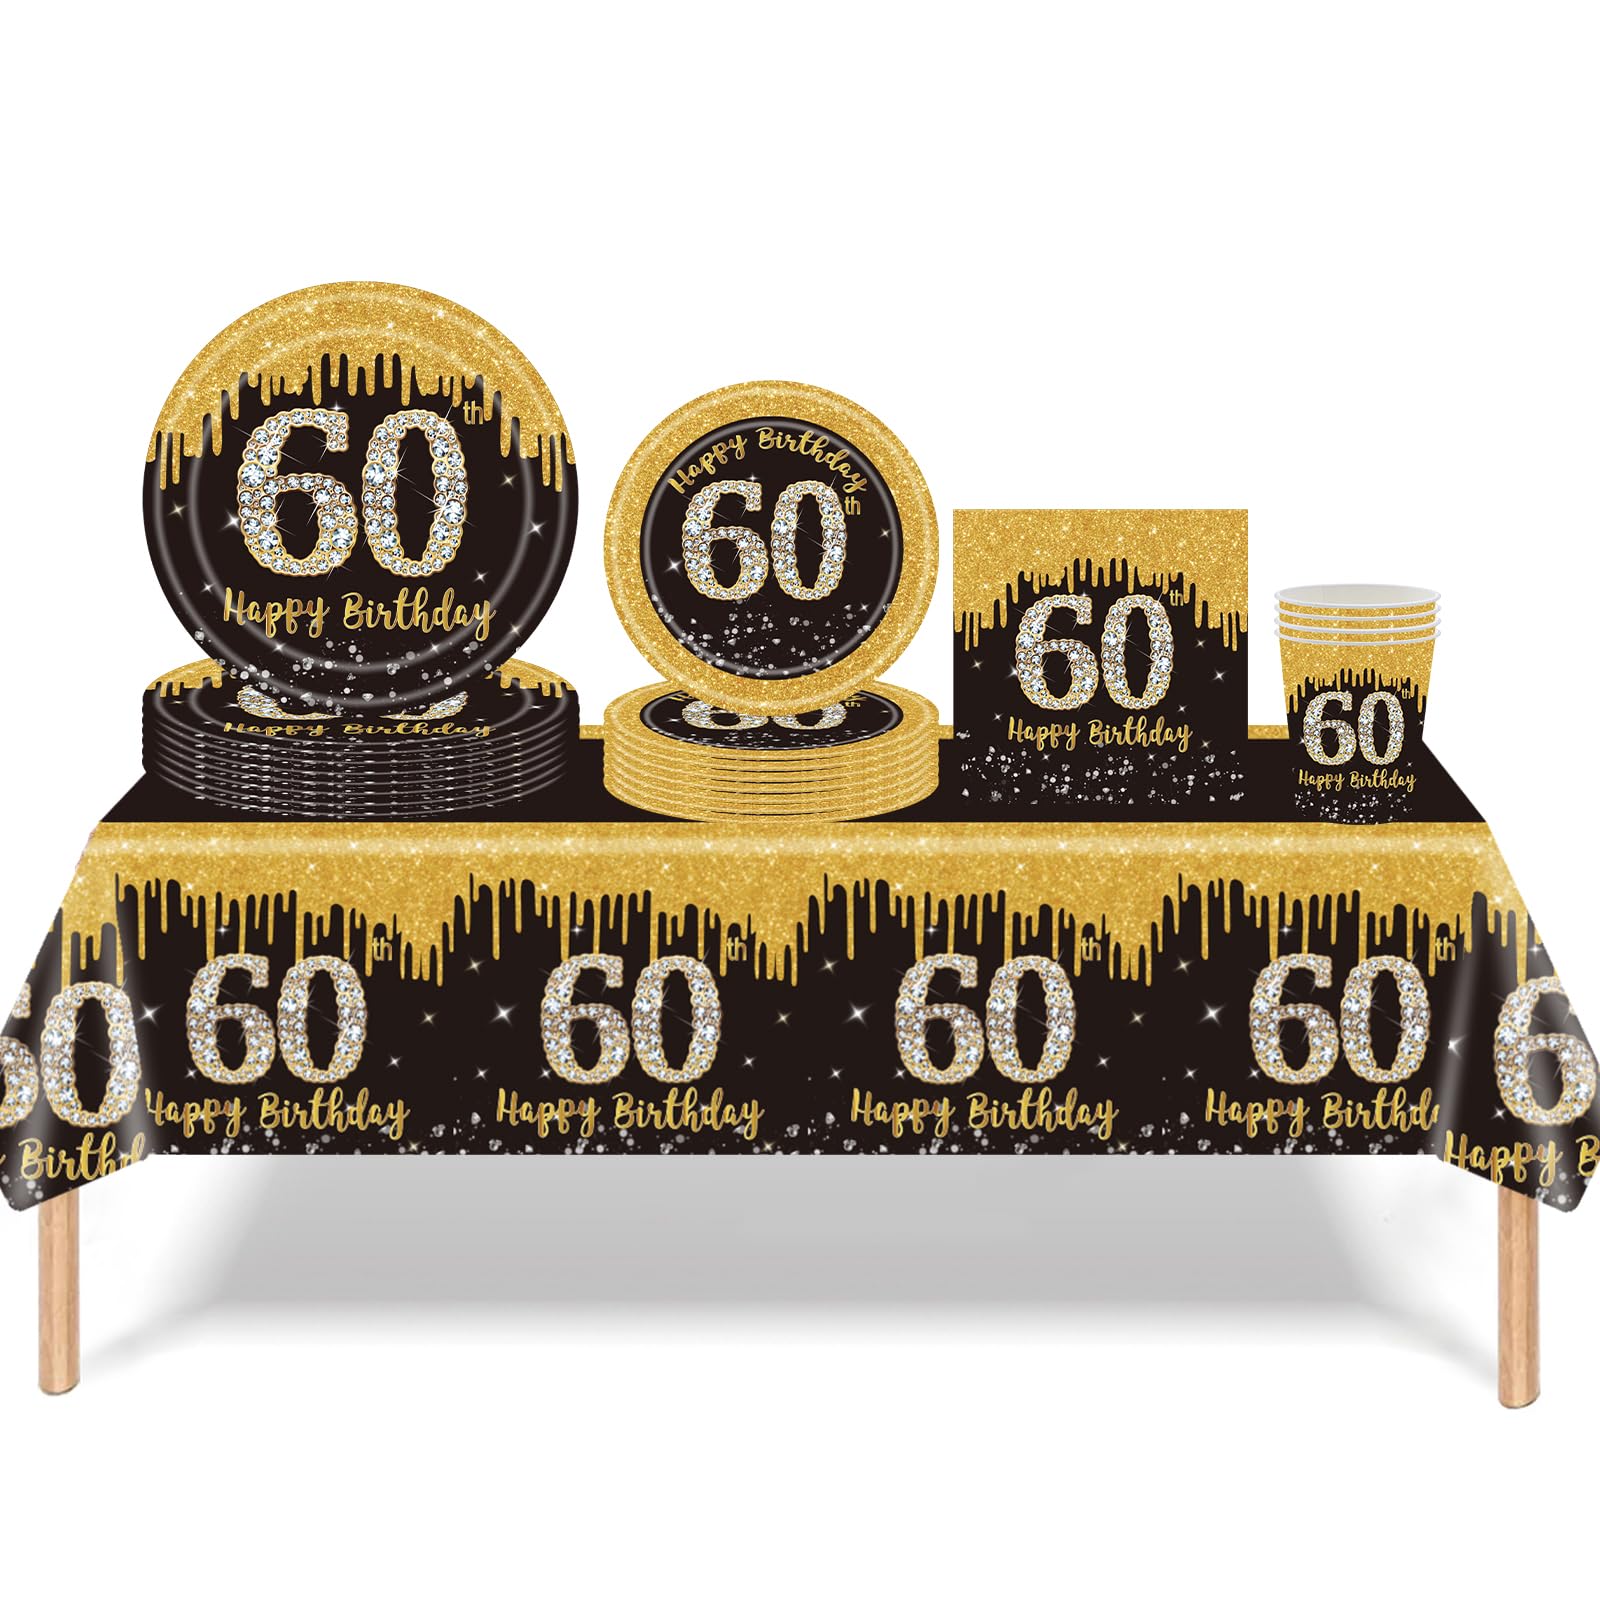 16Pcs 60th Birthday Black Gold Paper Plates 7 inch,60th Black Gold Birthday Disposable Party Paper Plates,Happy 60th Birthday Tableware Decorations for Her,Him,Men,Women,Birthday Gifts Party Supplies